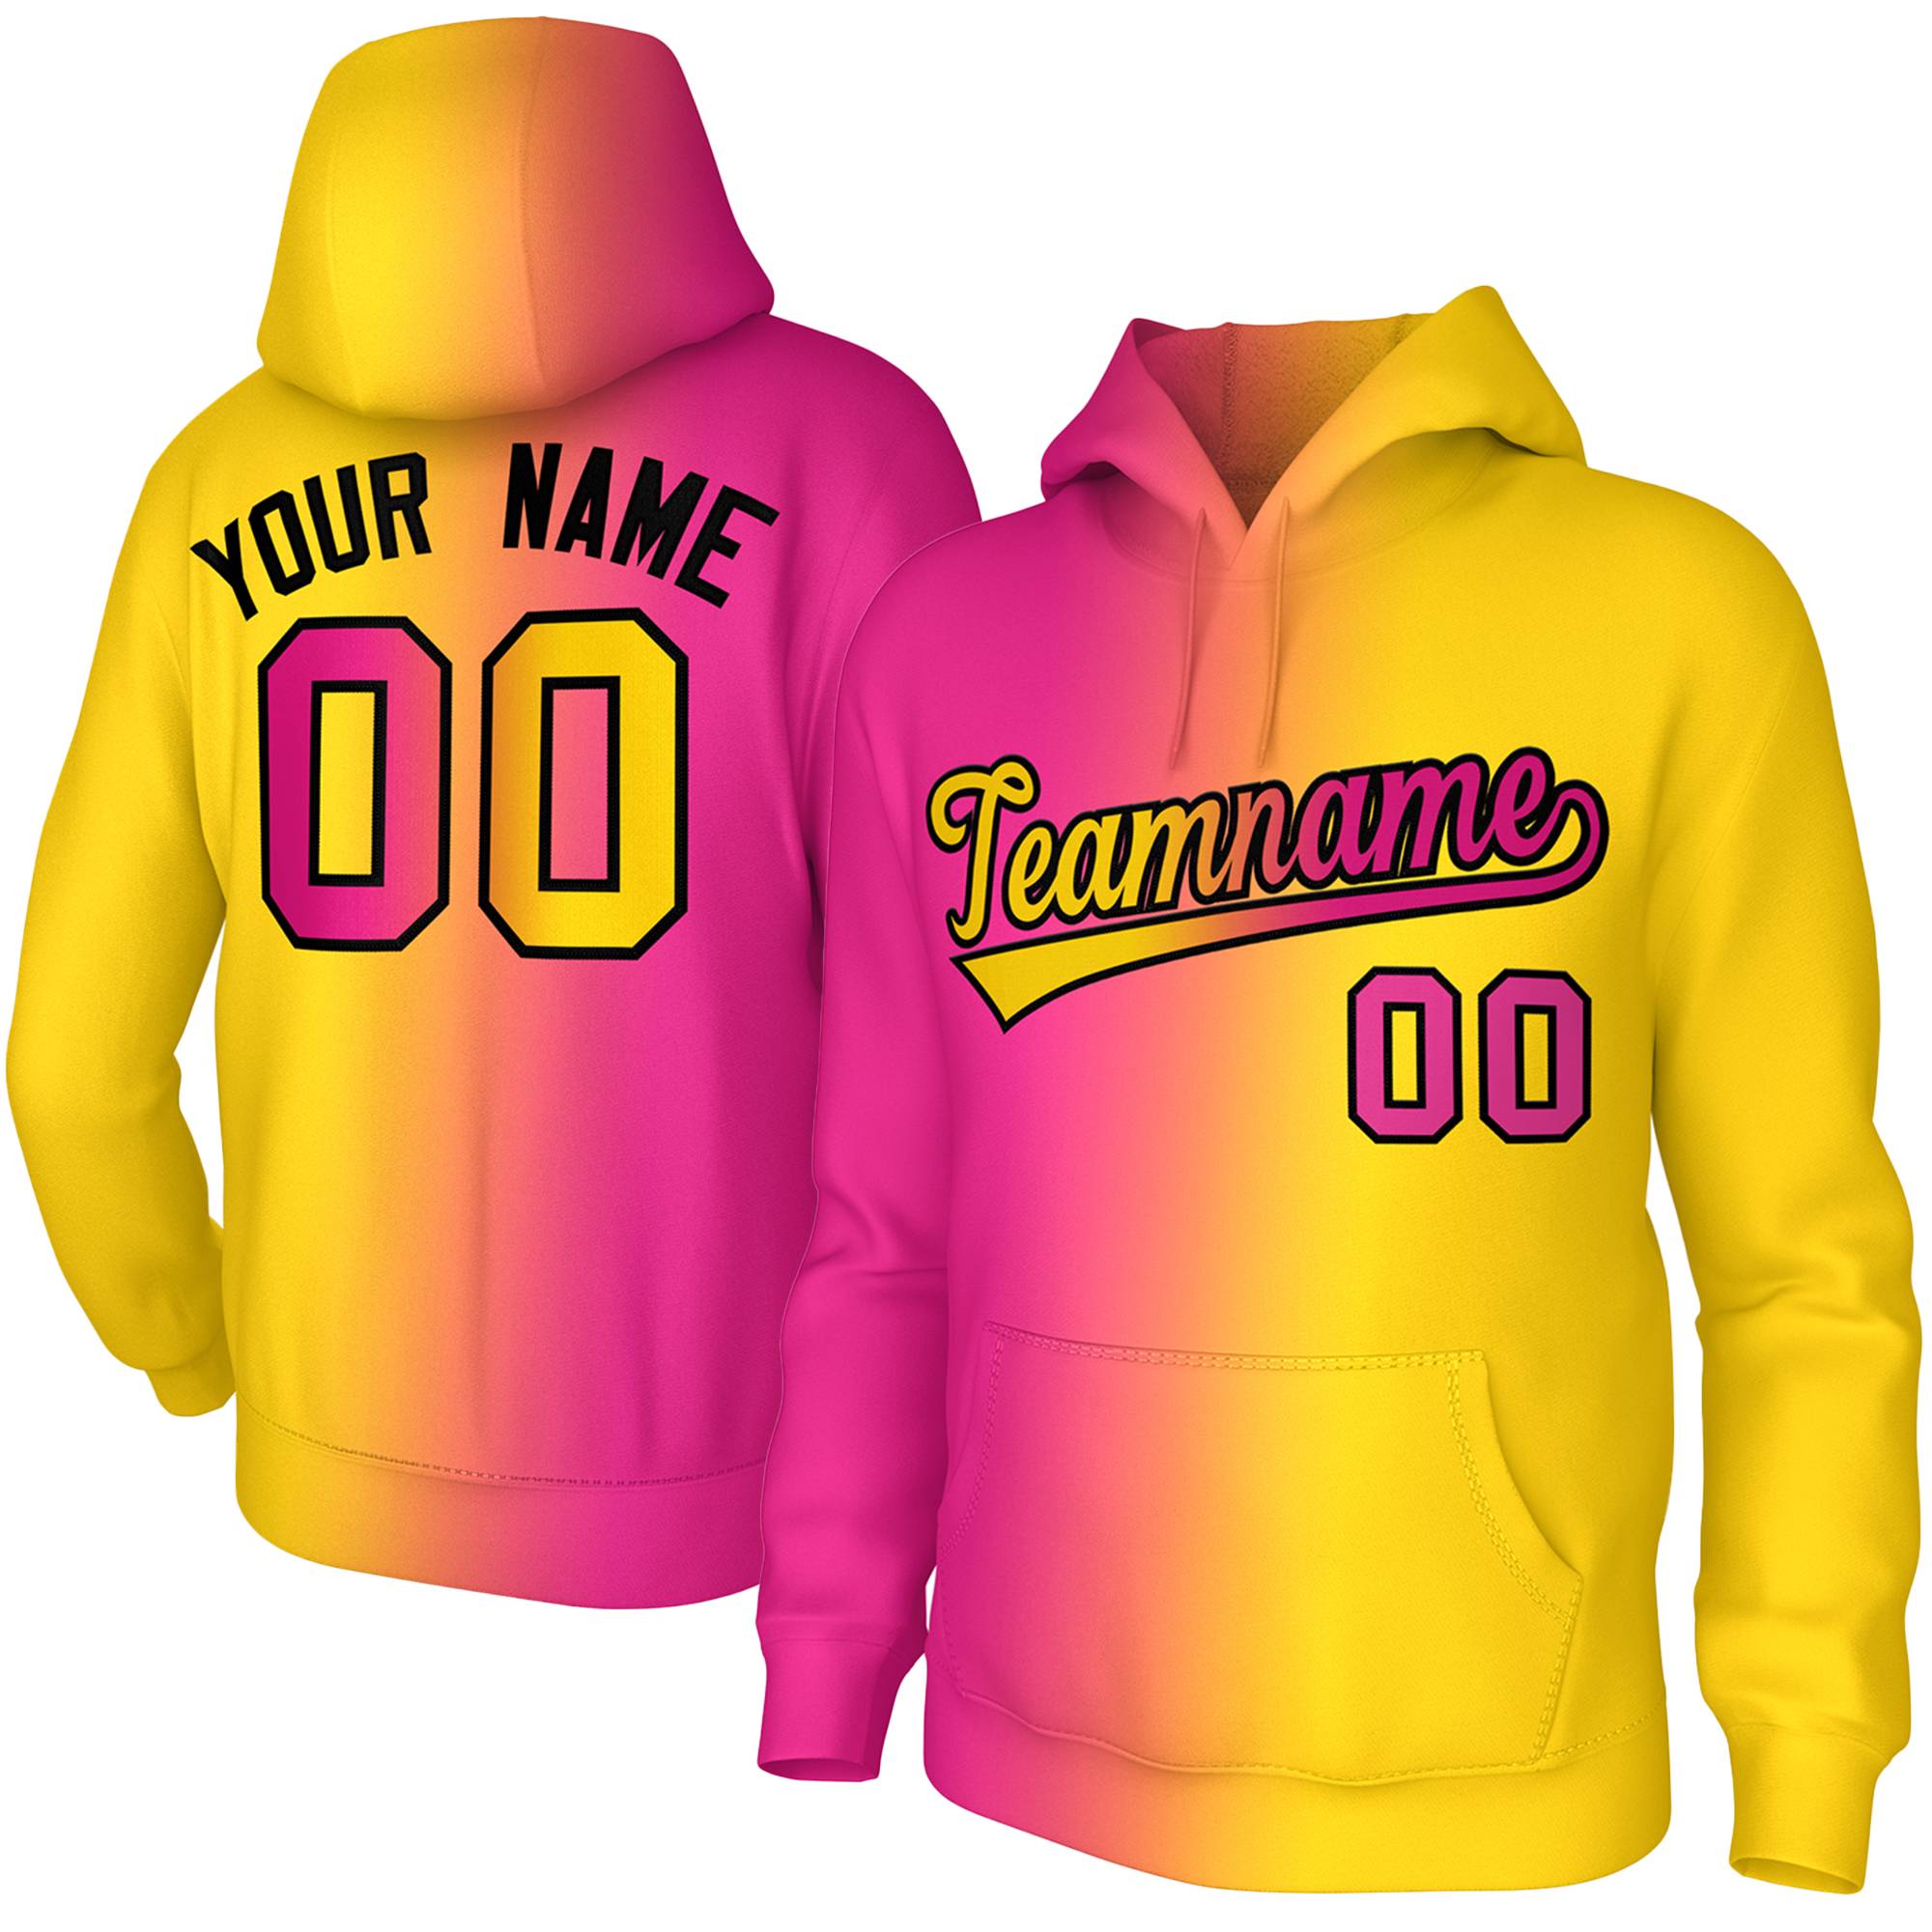 customizable best quality pullover hoodies